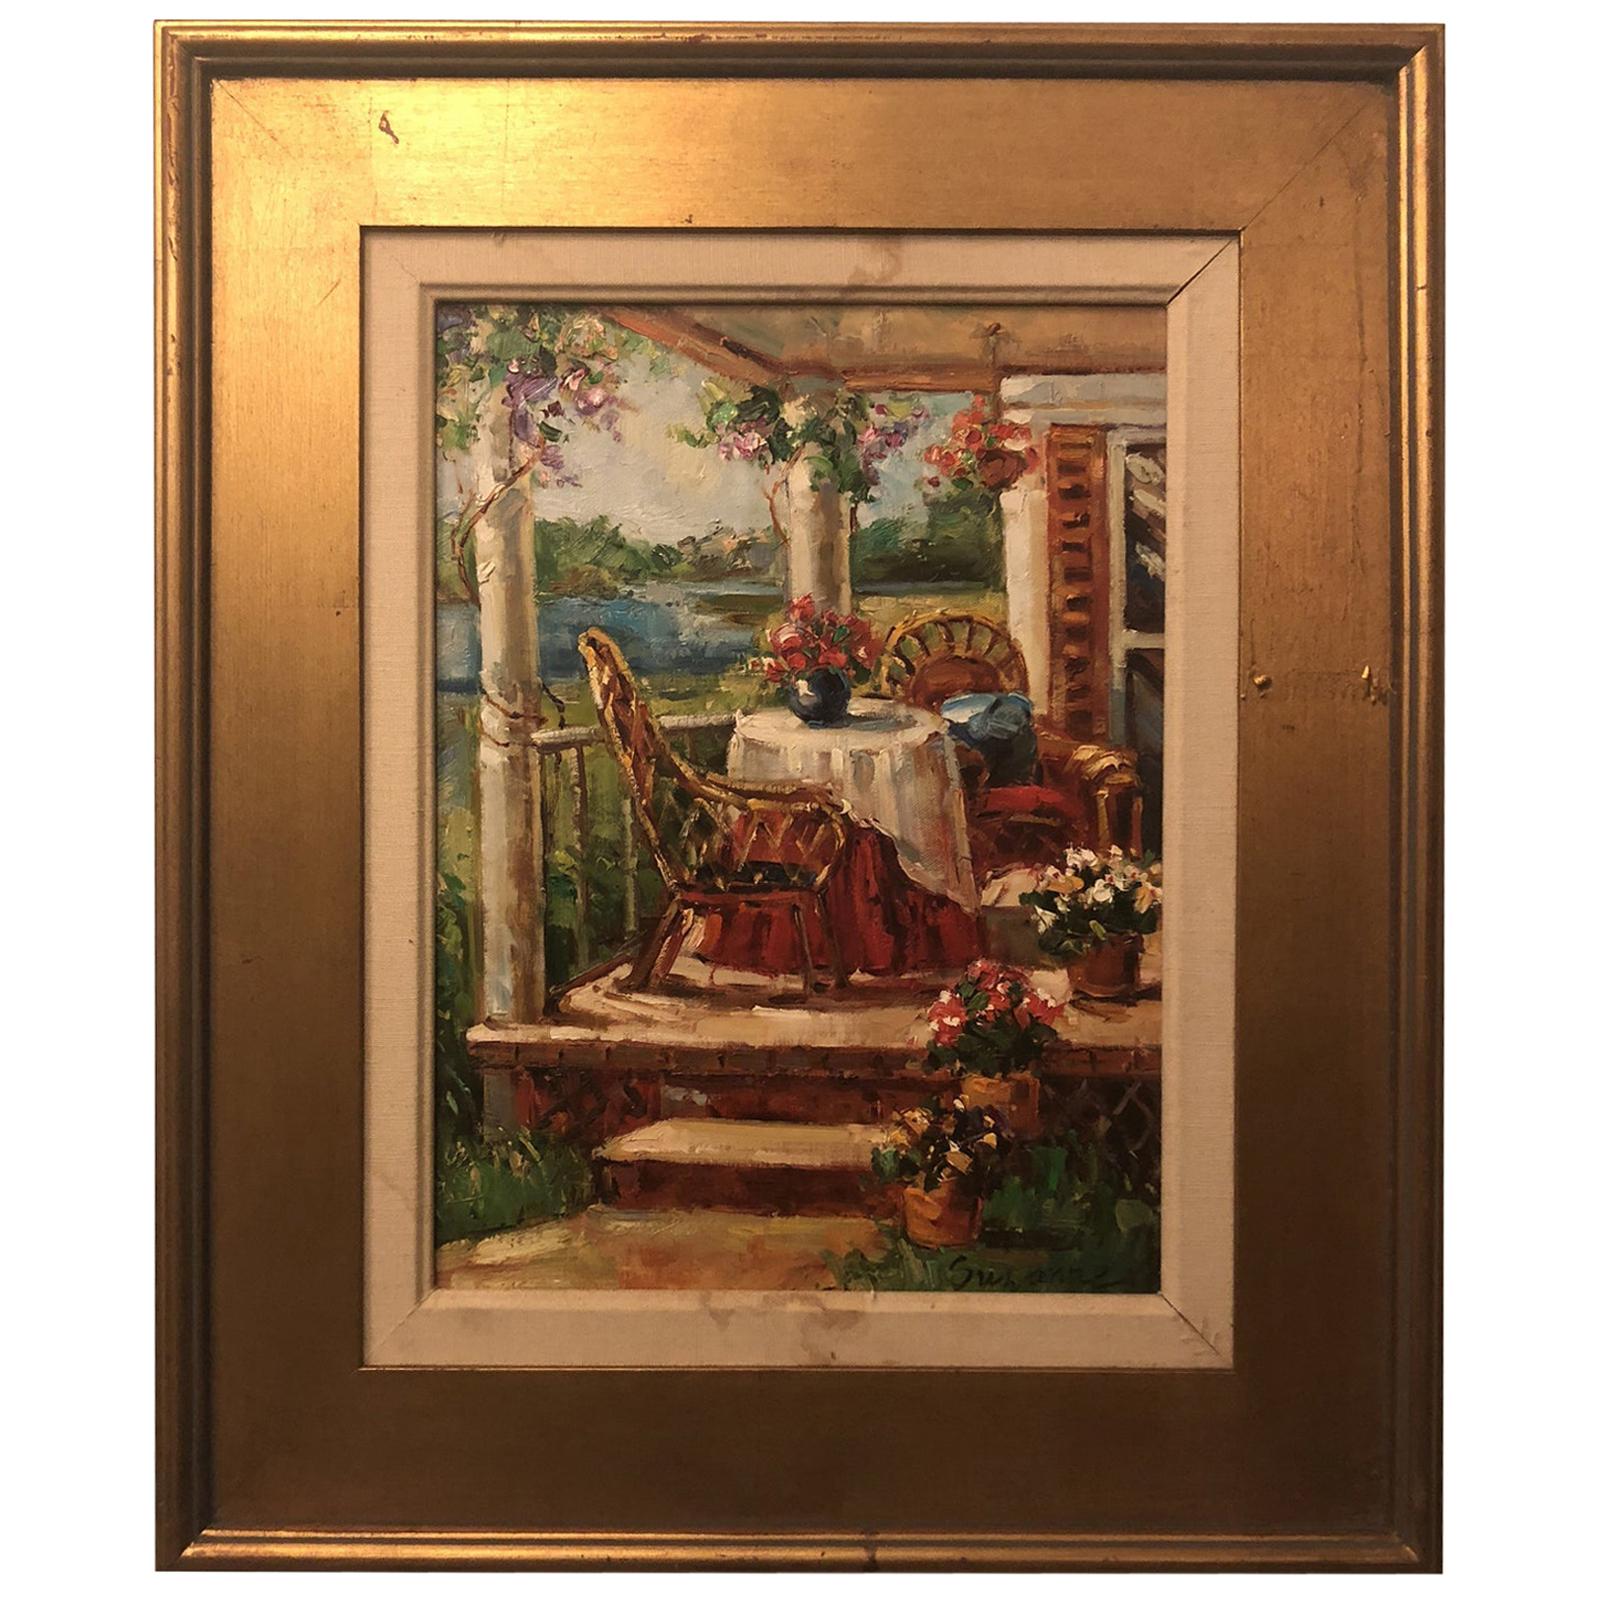 1980s Oil on Canvas Painting of a Home Porch Signed by Artist in Gilt Frame